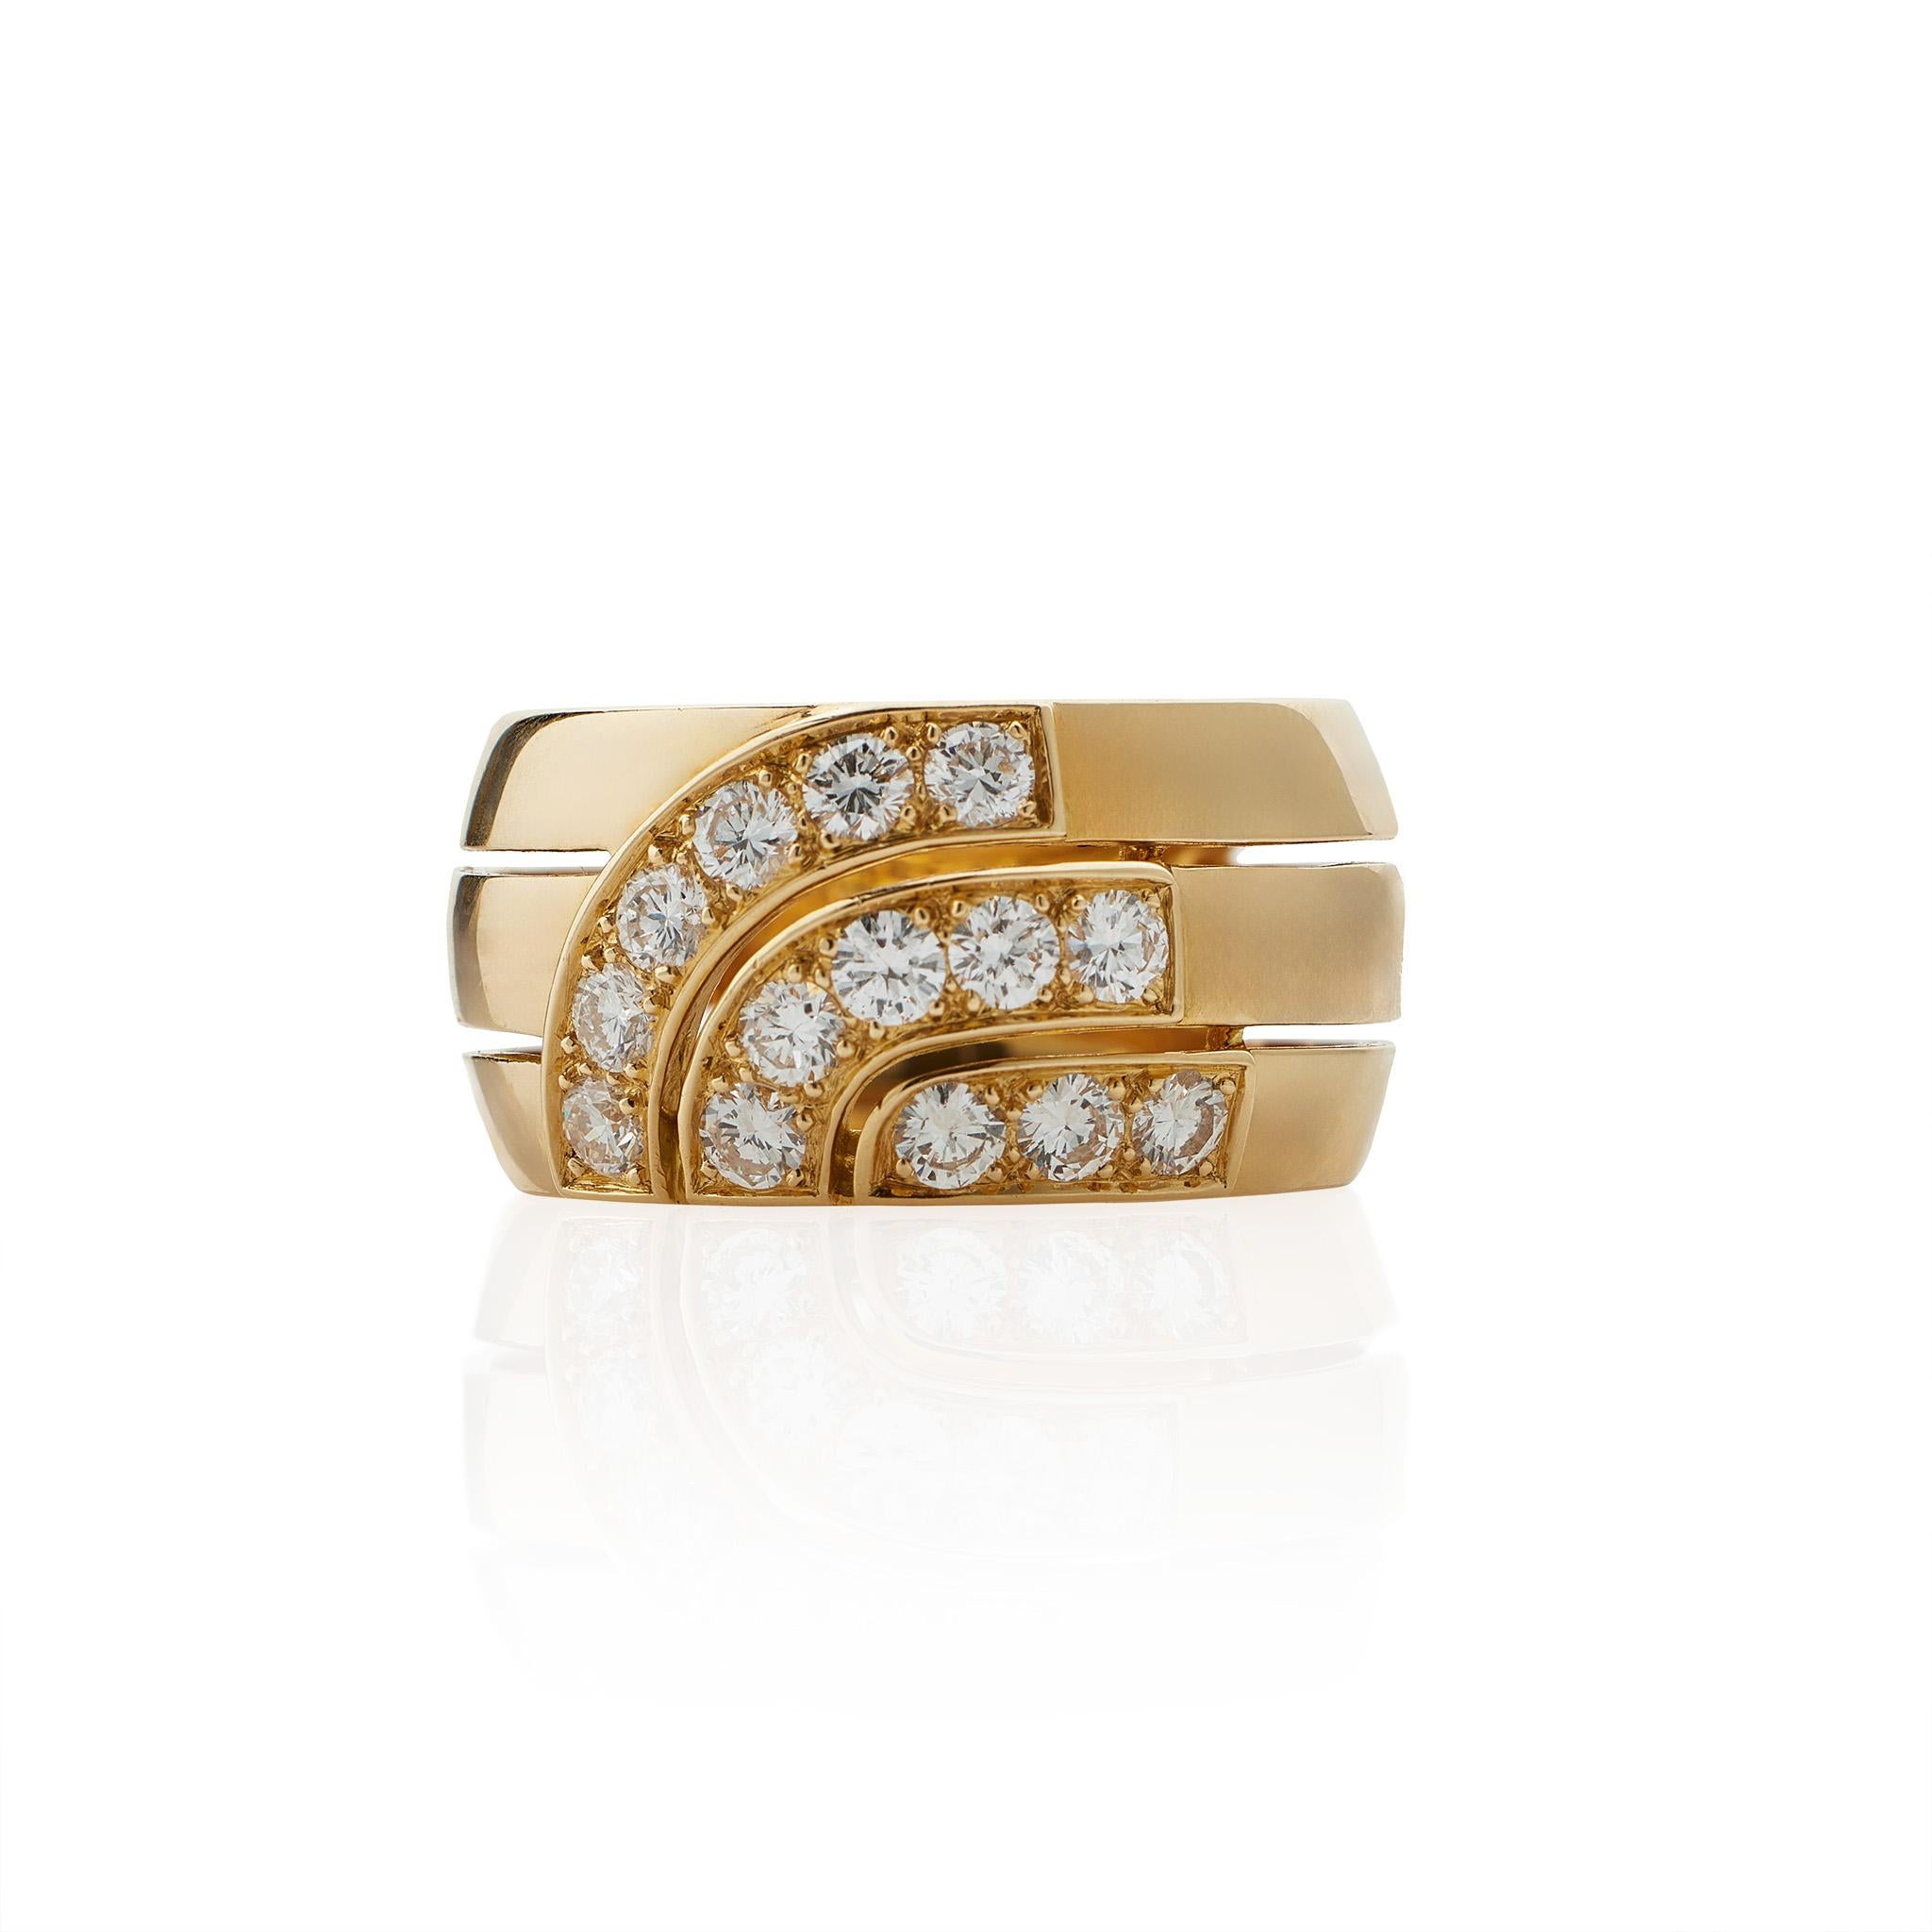 Cartier Paris 18K Gold and Diamond Ring In Excellent Condition For Sale In New York, NY